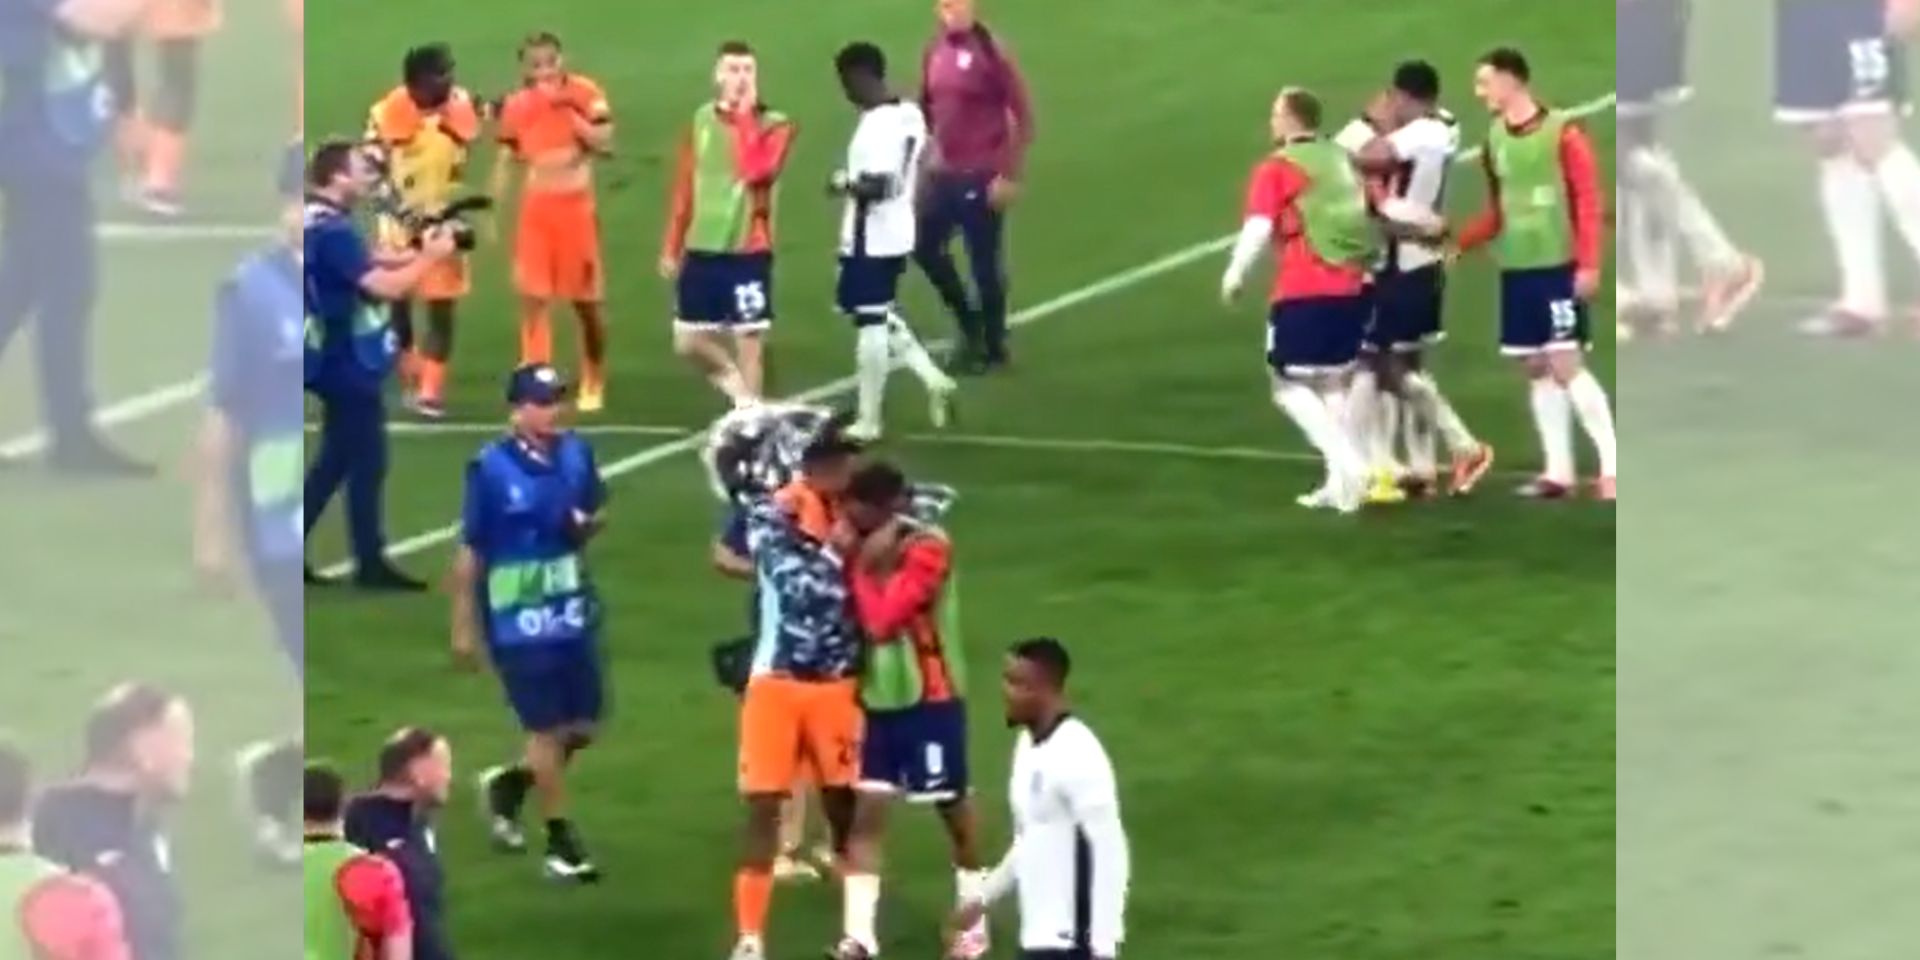 (Video) Beautiful moment between Gravenberch and Liverpool teammate after clash